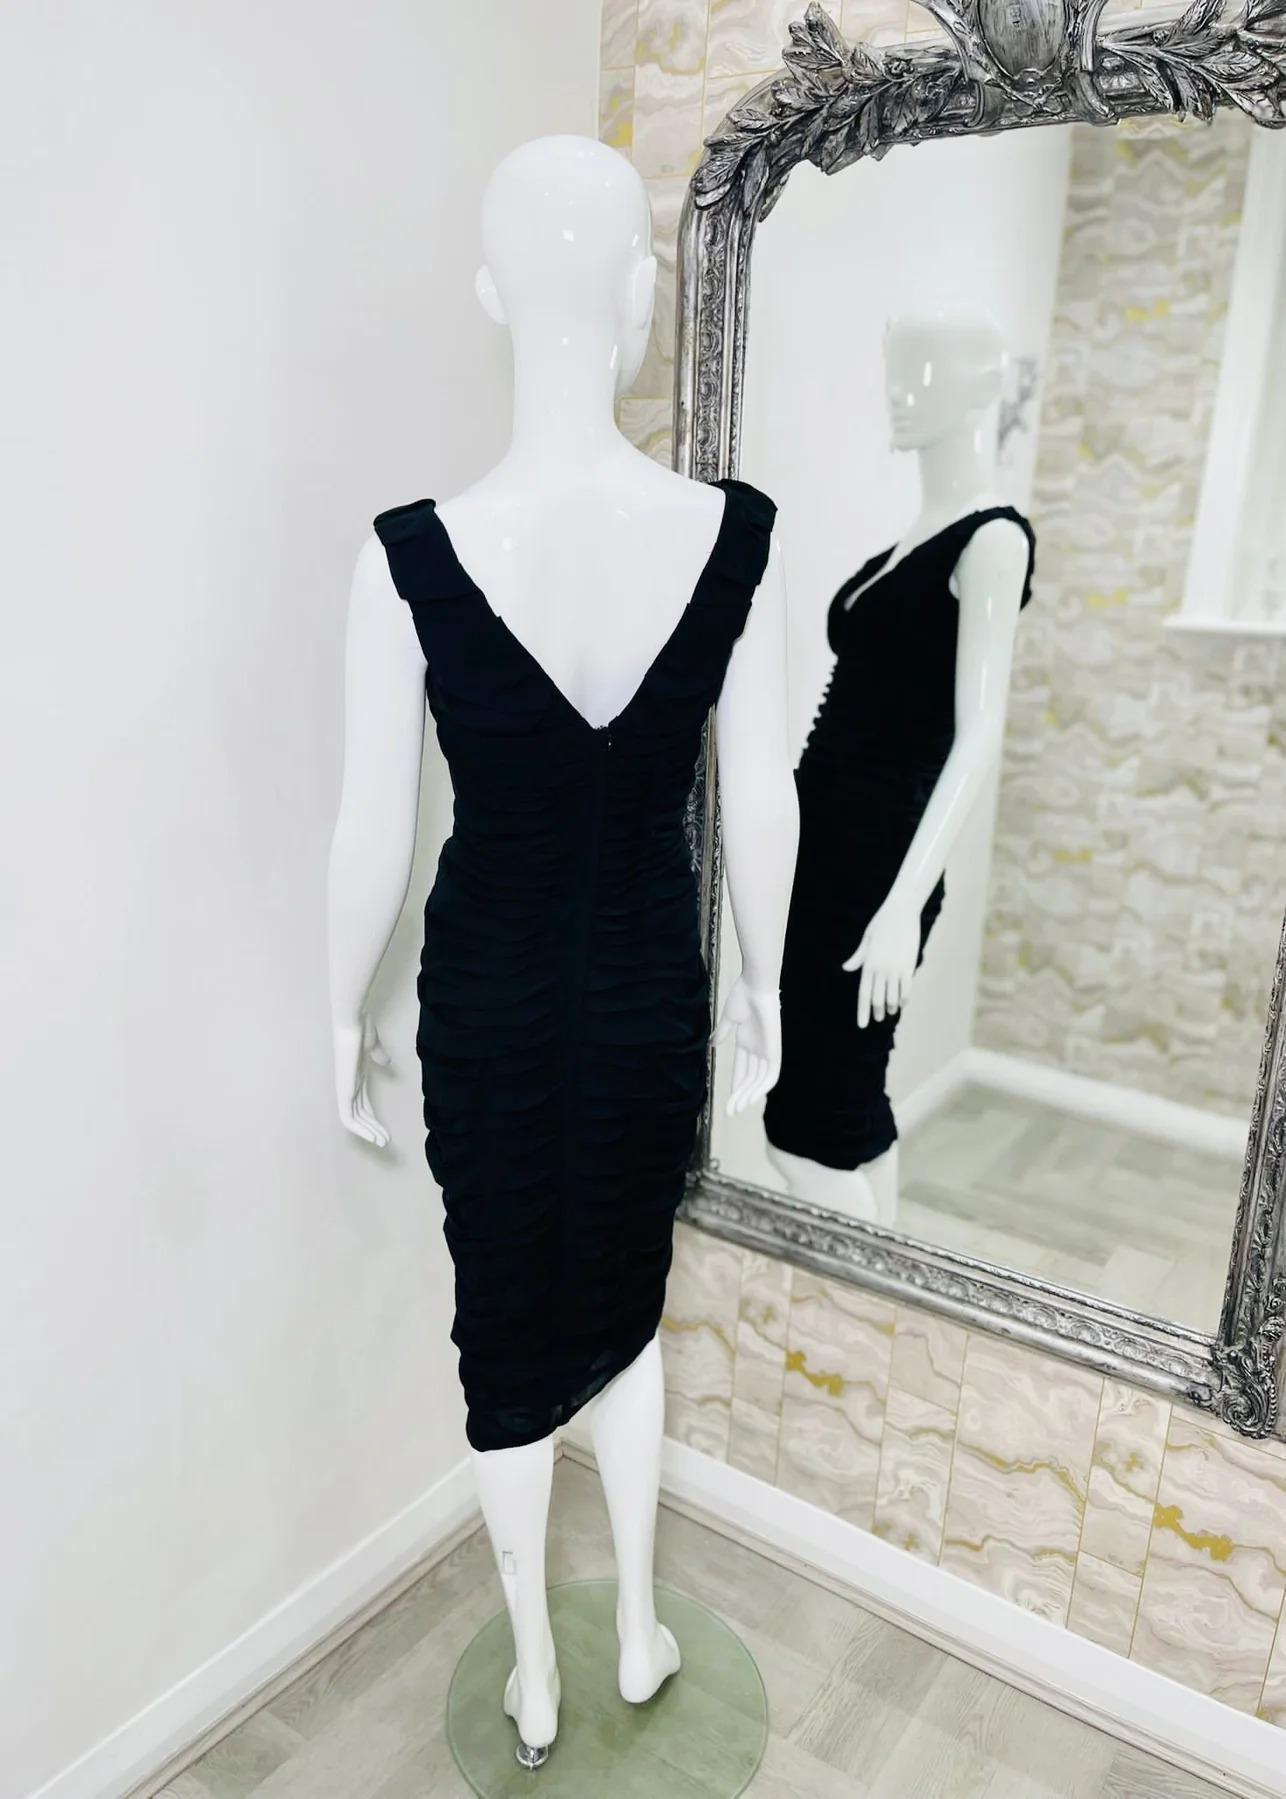 Yves Saint Laurent Silk Ruched Dress In Excellent Condition For Sale In London, GB